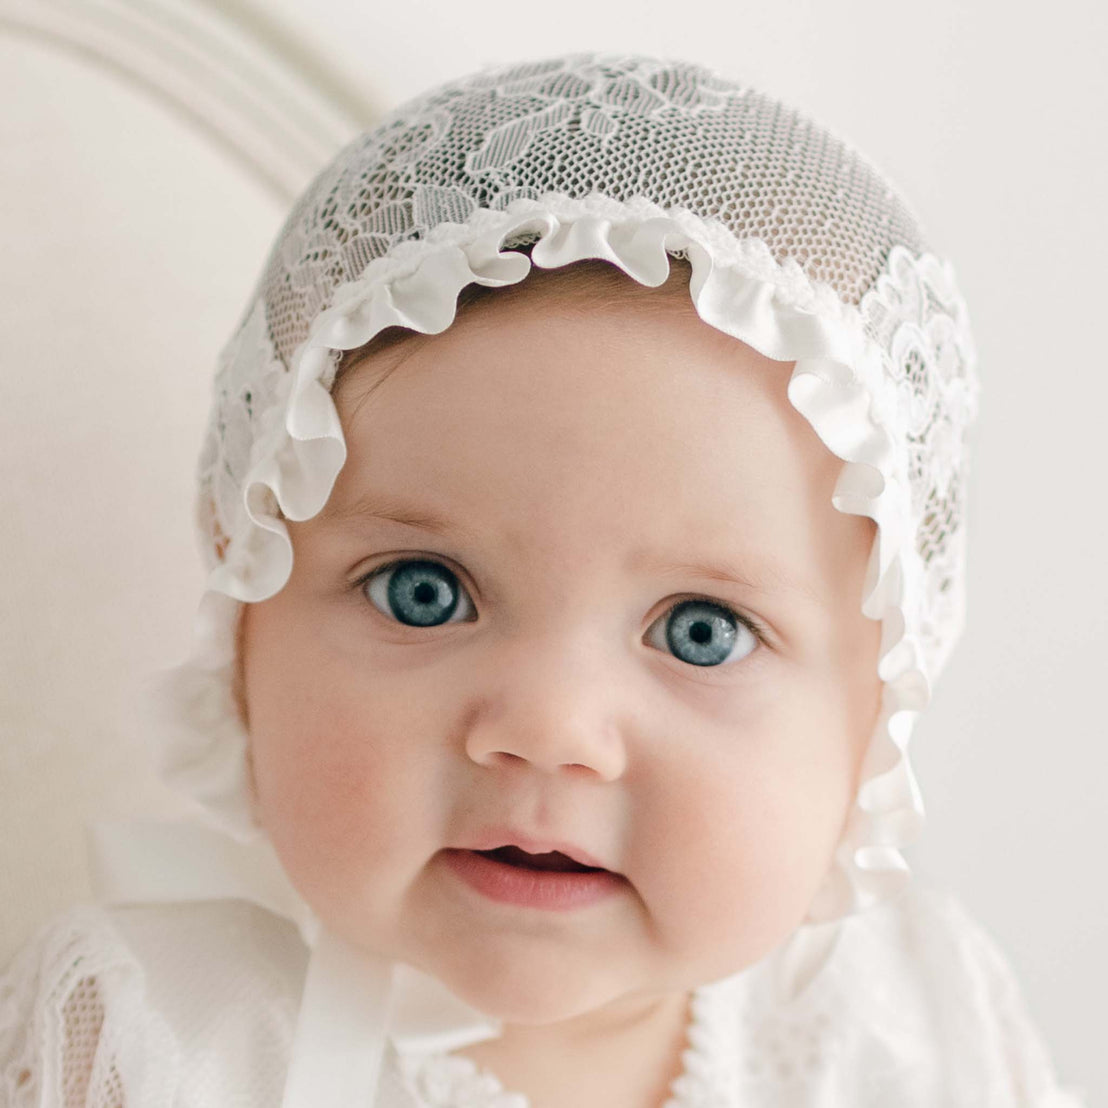 A baby girl with big blue eyes is wearing the Victoria Lace Bonnet with ruffled edges, complementing her Victoria Puff Sleeve Christening Gown. The baby looks directly at the camera with a smile. The background is softly lit and plain.